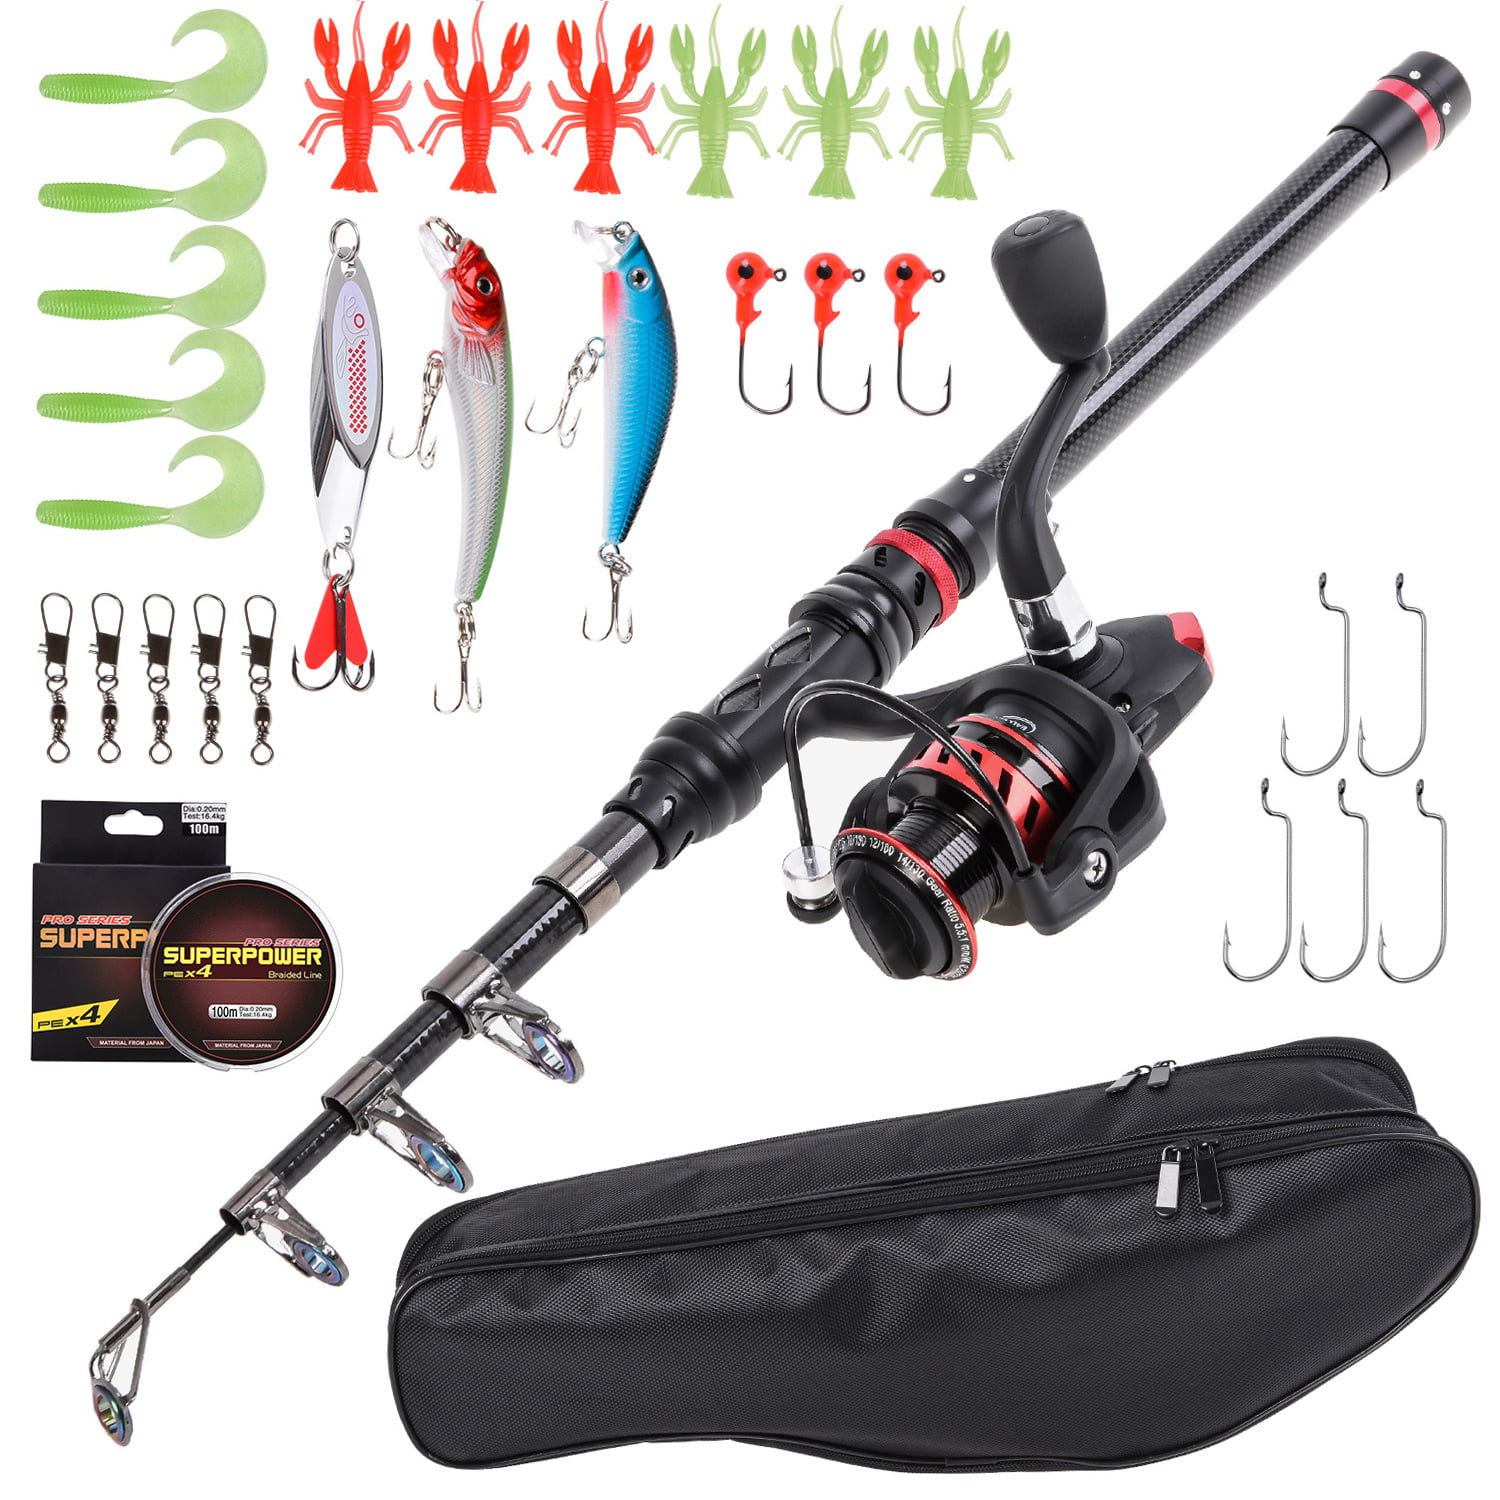 Portable Spinning Telescopic Fishing Rod Reel Combos Full Kit With Fishing Acces 